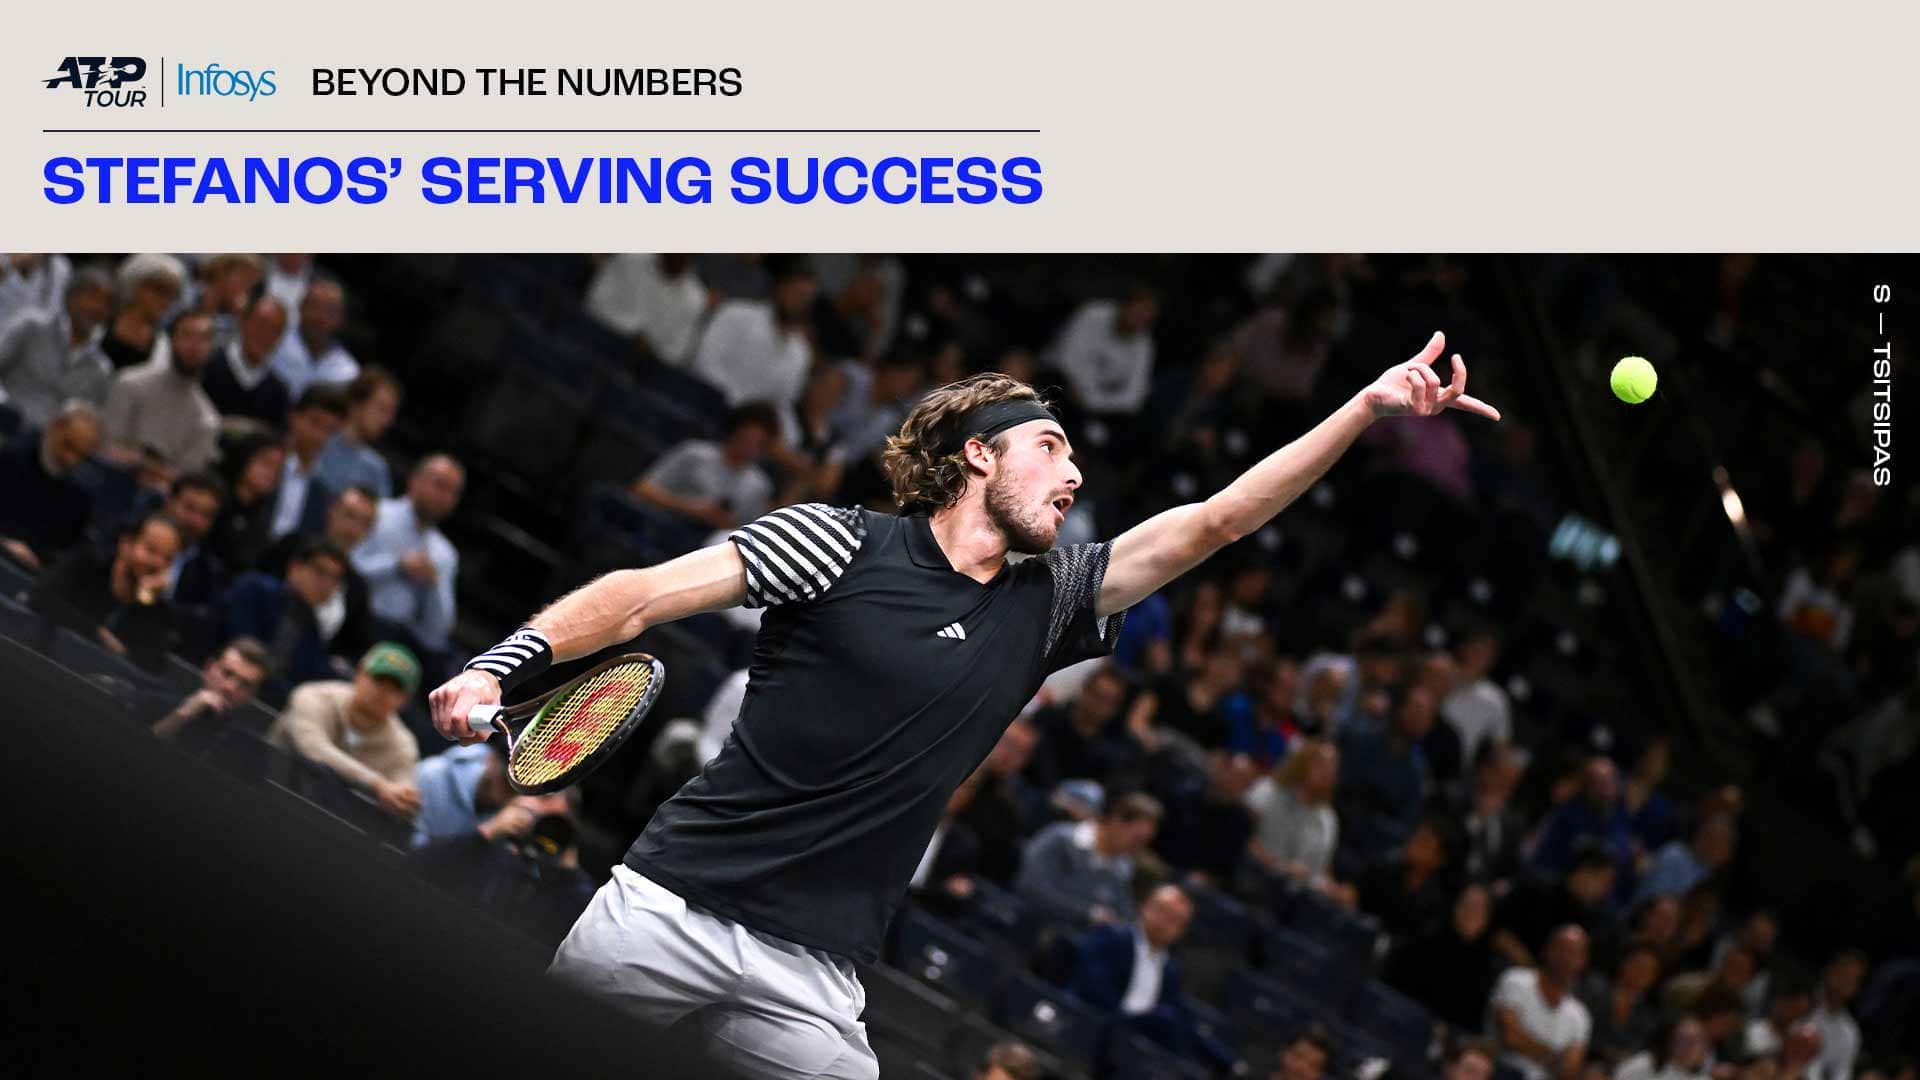 Stefanos Tsitsipas leads the ATP Tour in percentage of service games won this season.